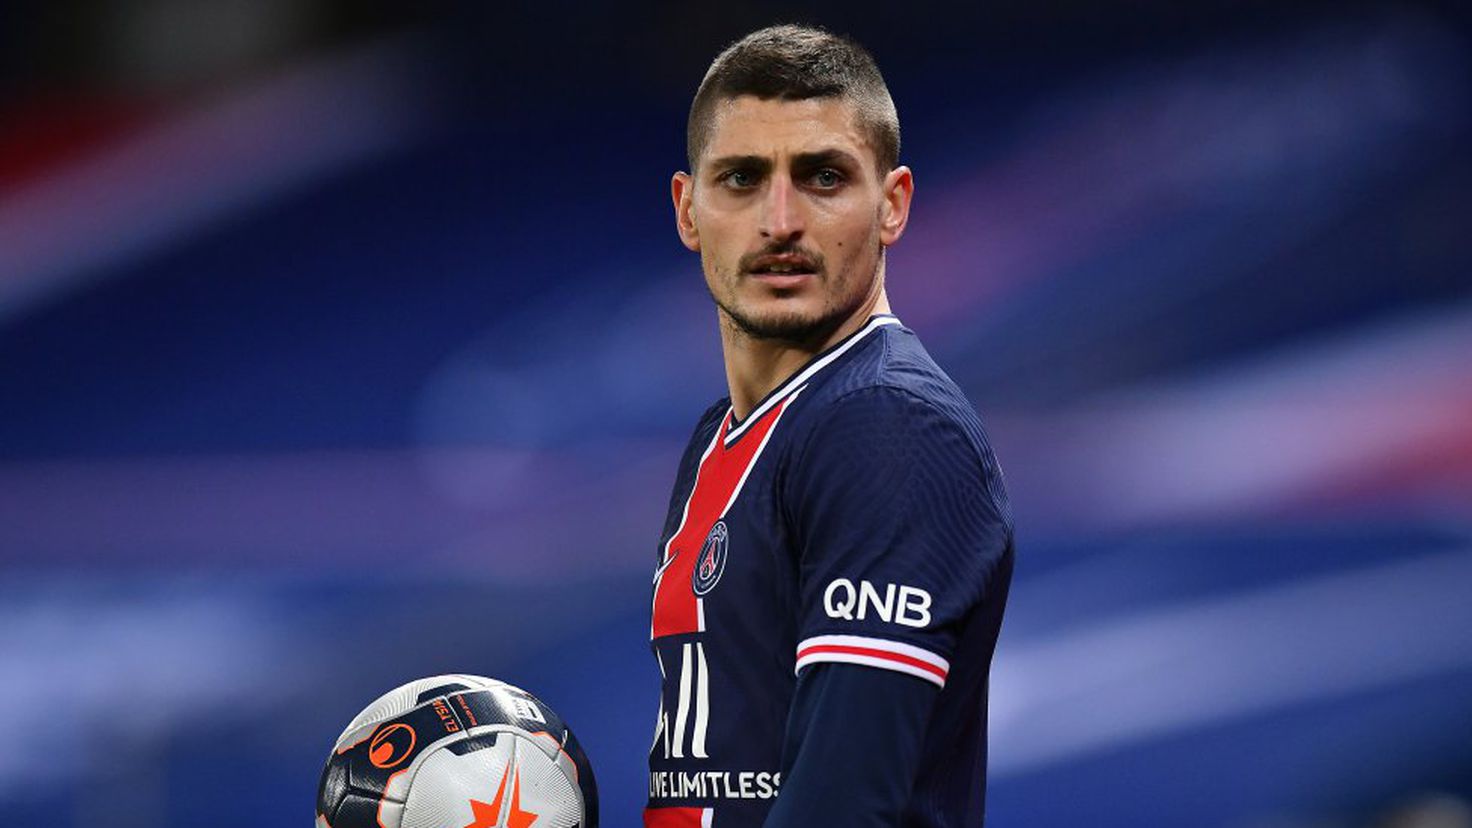 Verratti wants to leave and Real Madrid attracts him
